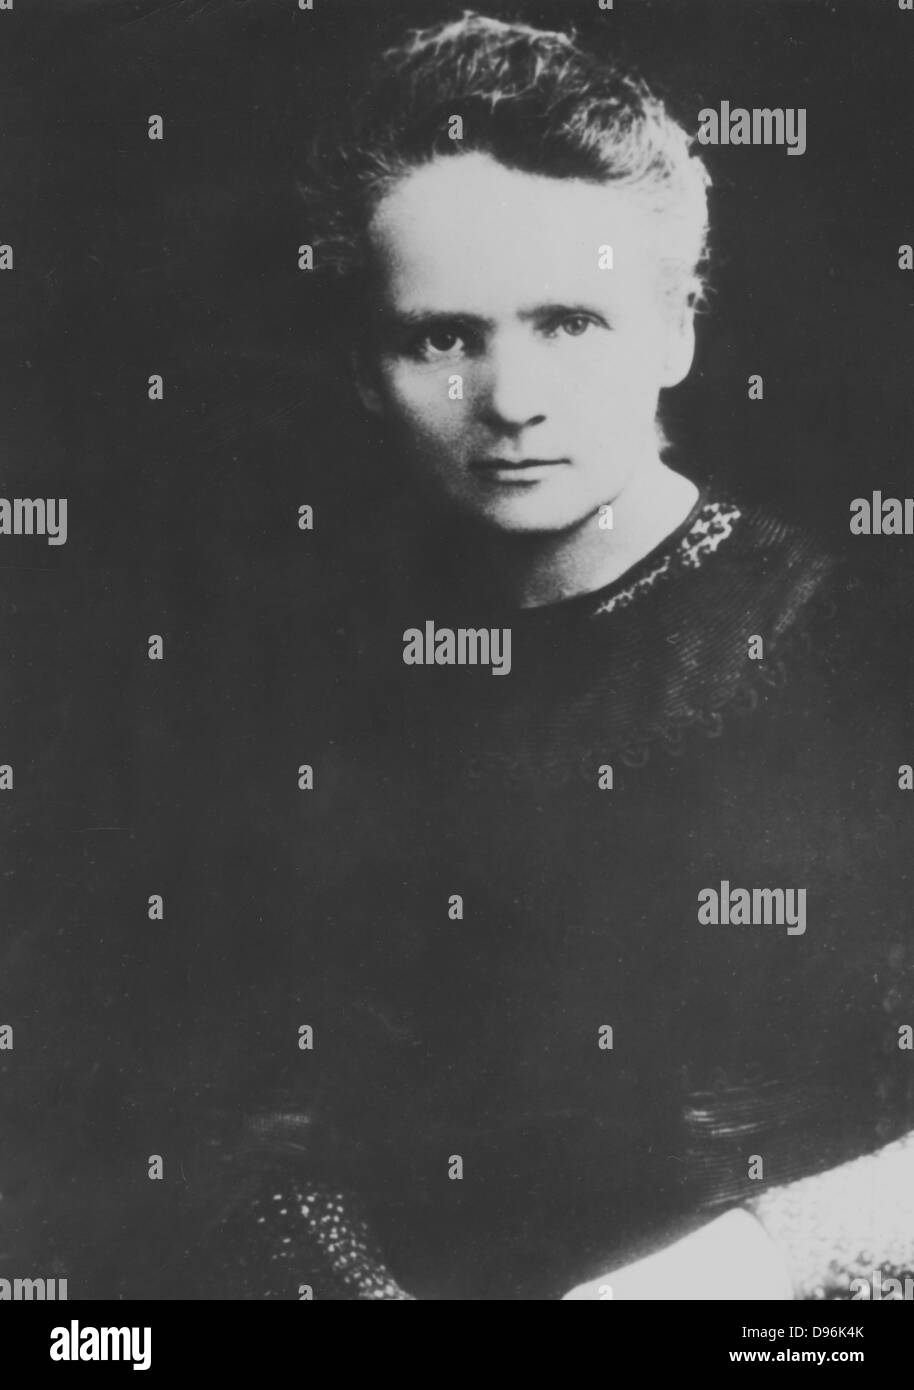 Marie Curie (1867-1934) Polish-born French physicist. Award Nobel prize for physics jointly with her husband, Pierre, and Henri Becquerel for work on radioactivity (1903) and alone for chemistry in 1911 for isolation of pure radium. Stock Photo